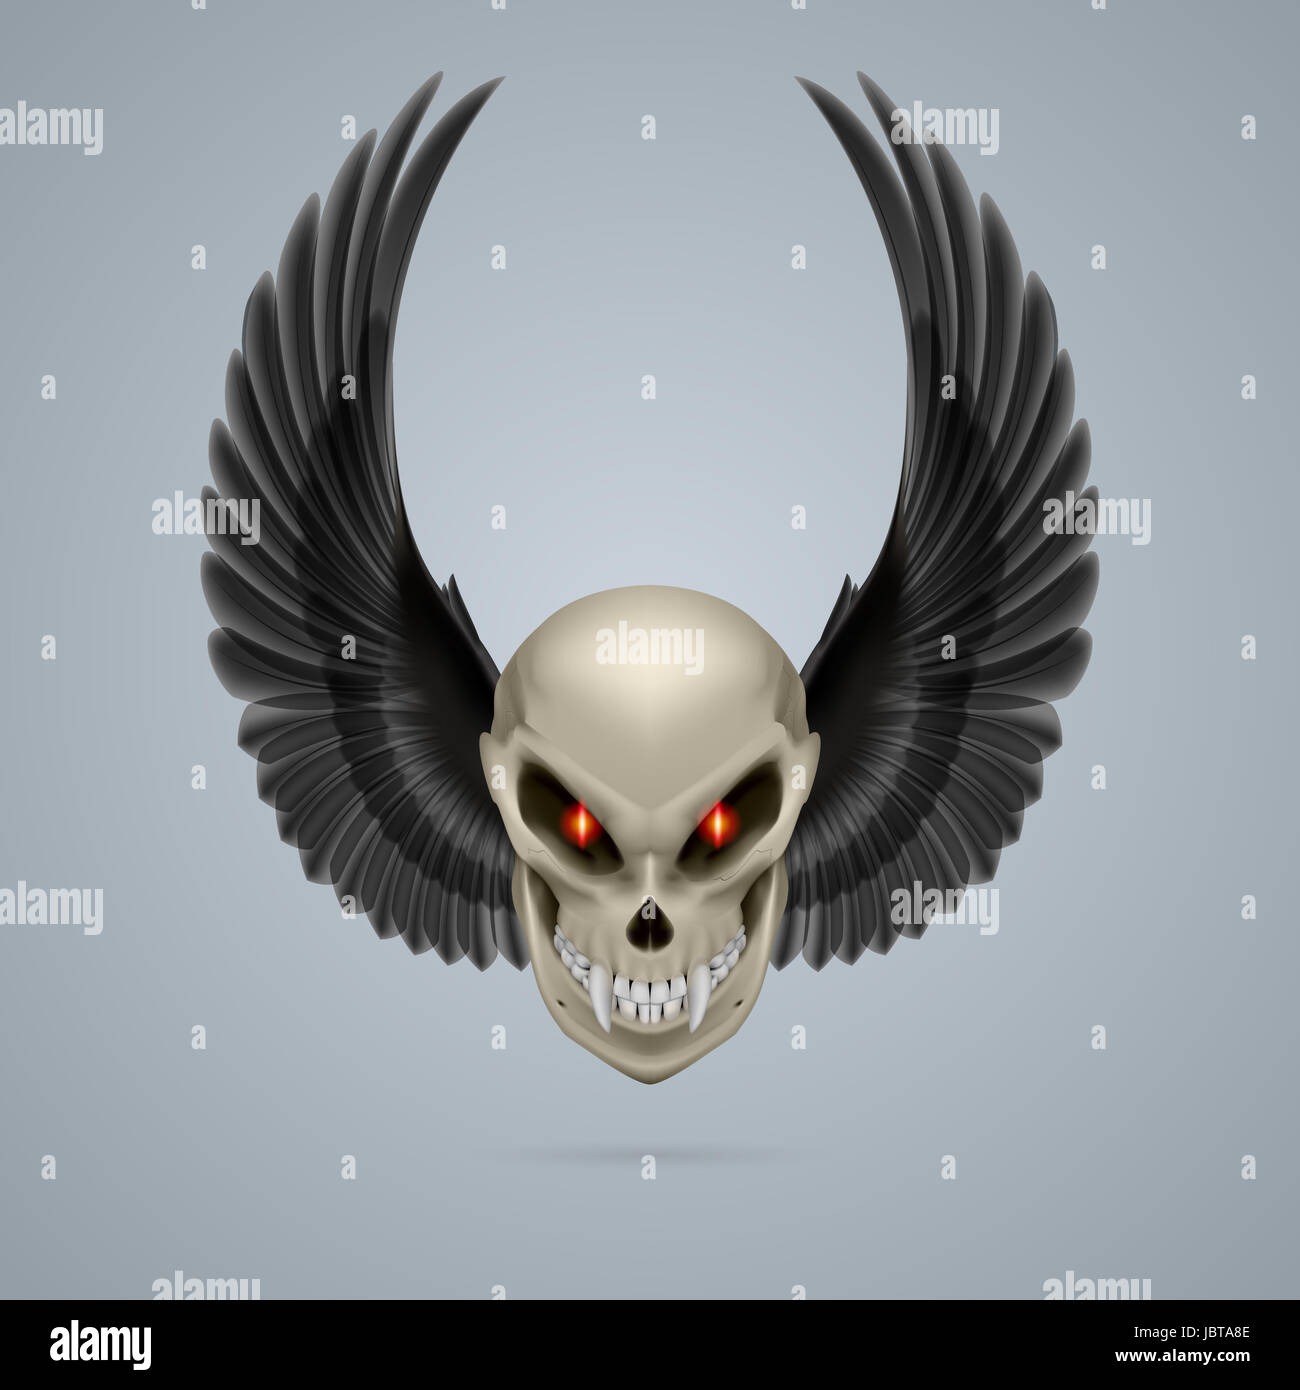 Terrifying mutant skull with long fangs and black wings Stock Photo